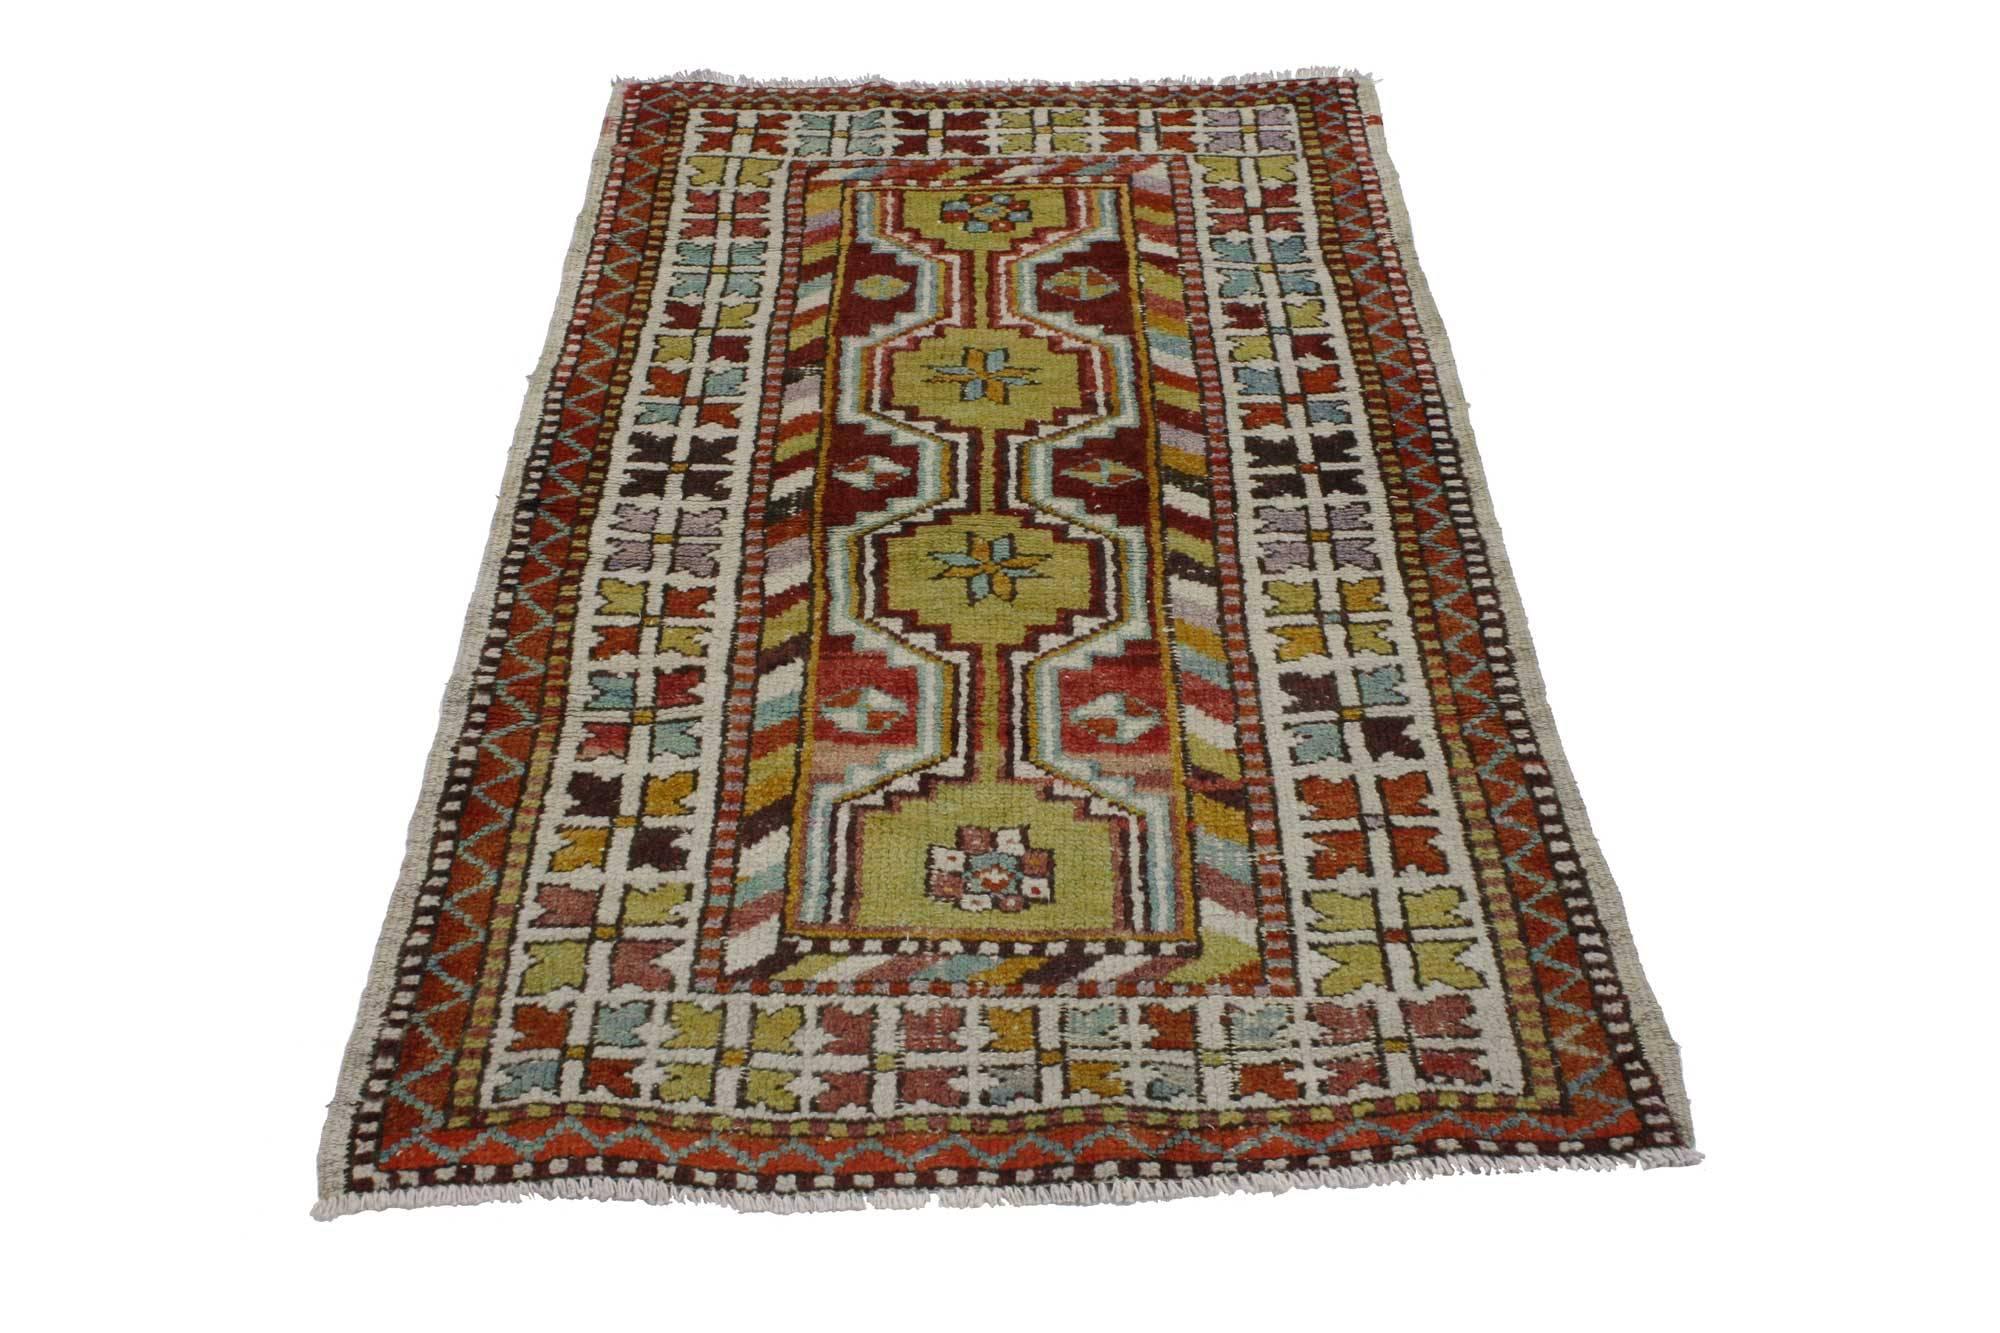 51747, vintage Turkish Oushak rug, colorful rug for kitchen, bath, foyer or entryway. This hand-knotted wool vintage Turkish Oushak rug features a modern traditional style. Immersed in Anatolian history and refined colors, this vintage Oushak rug